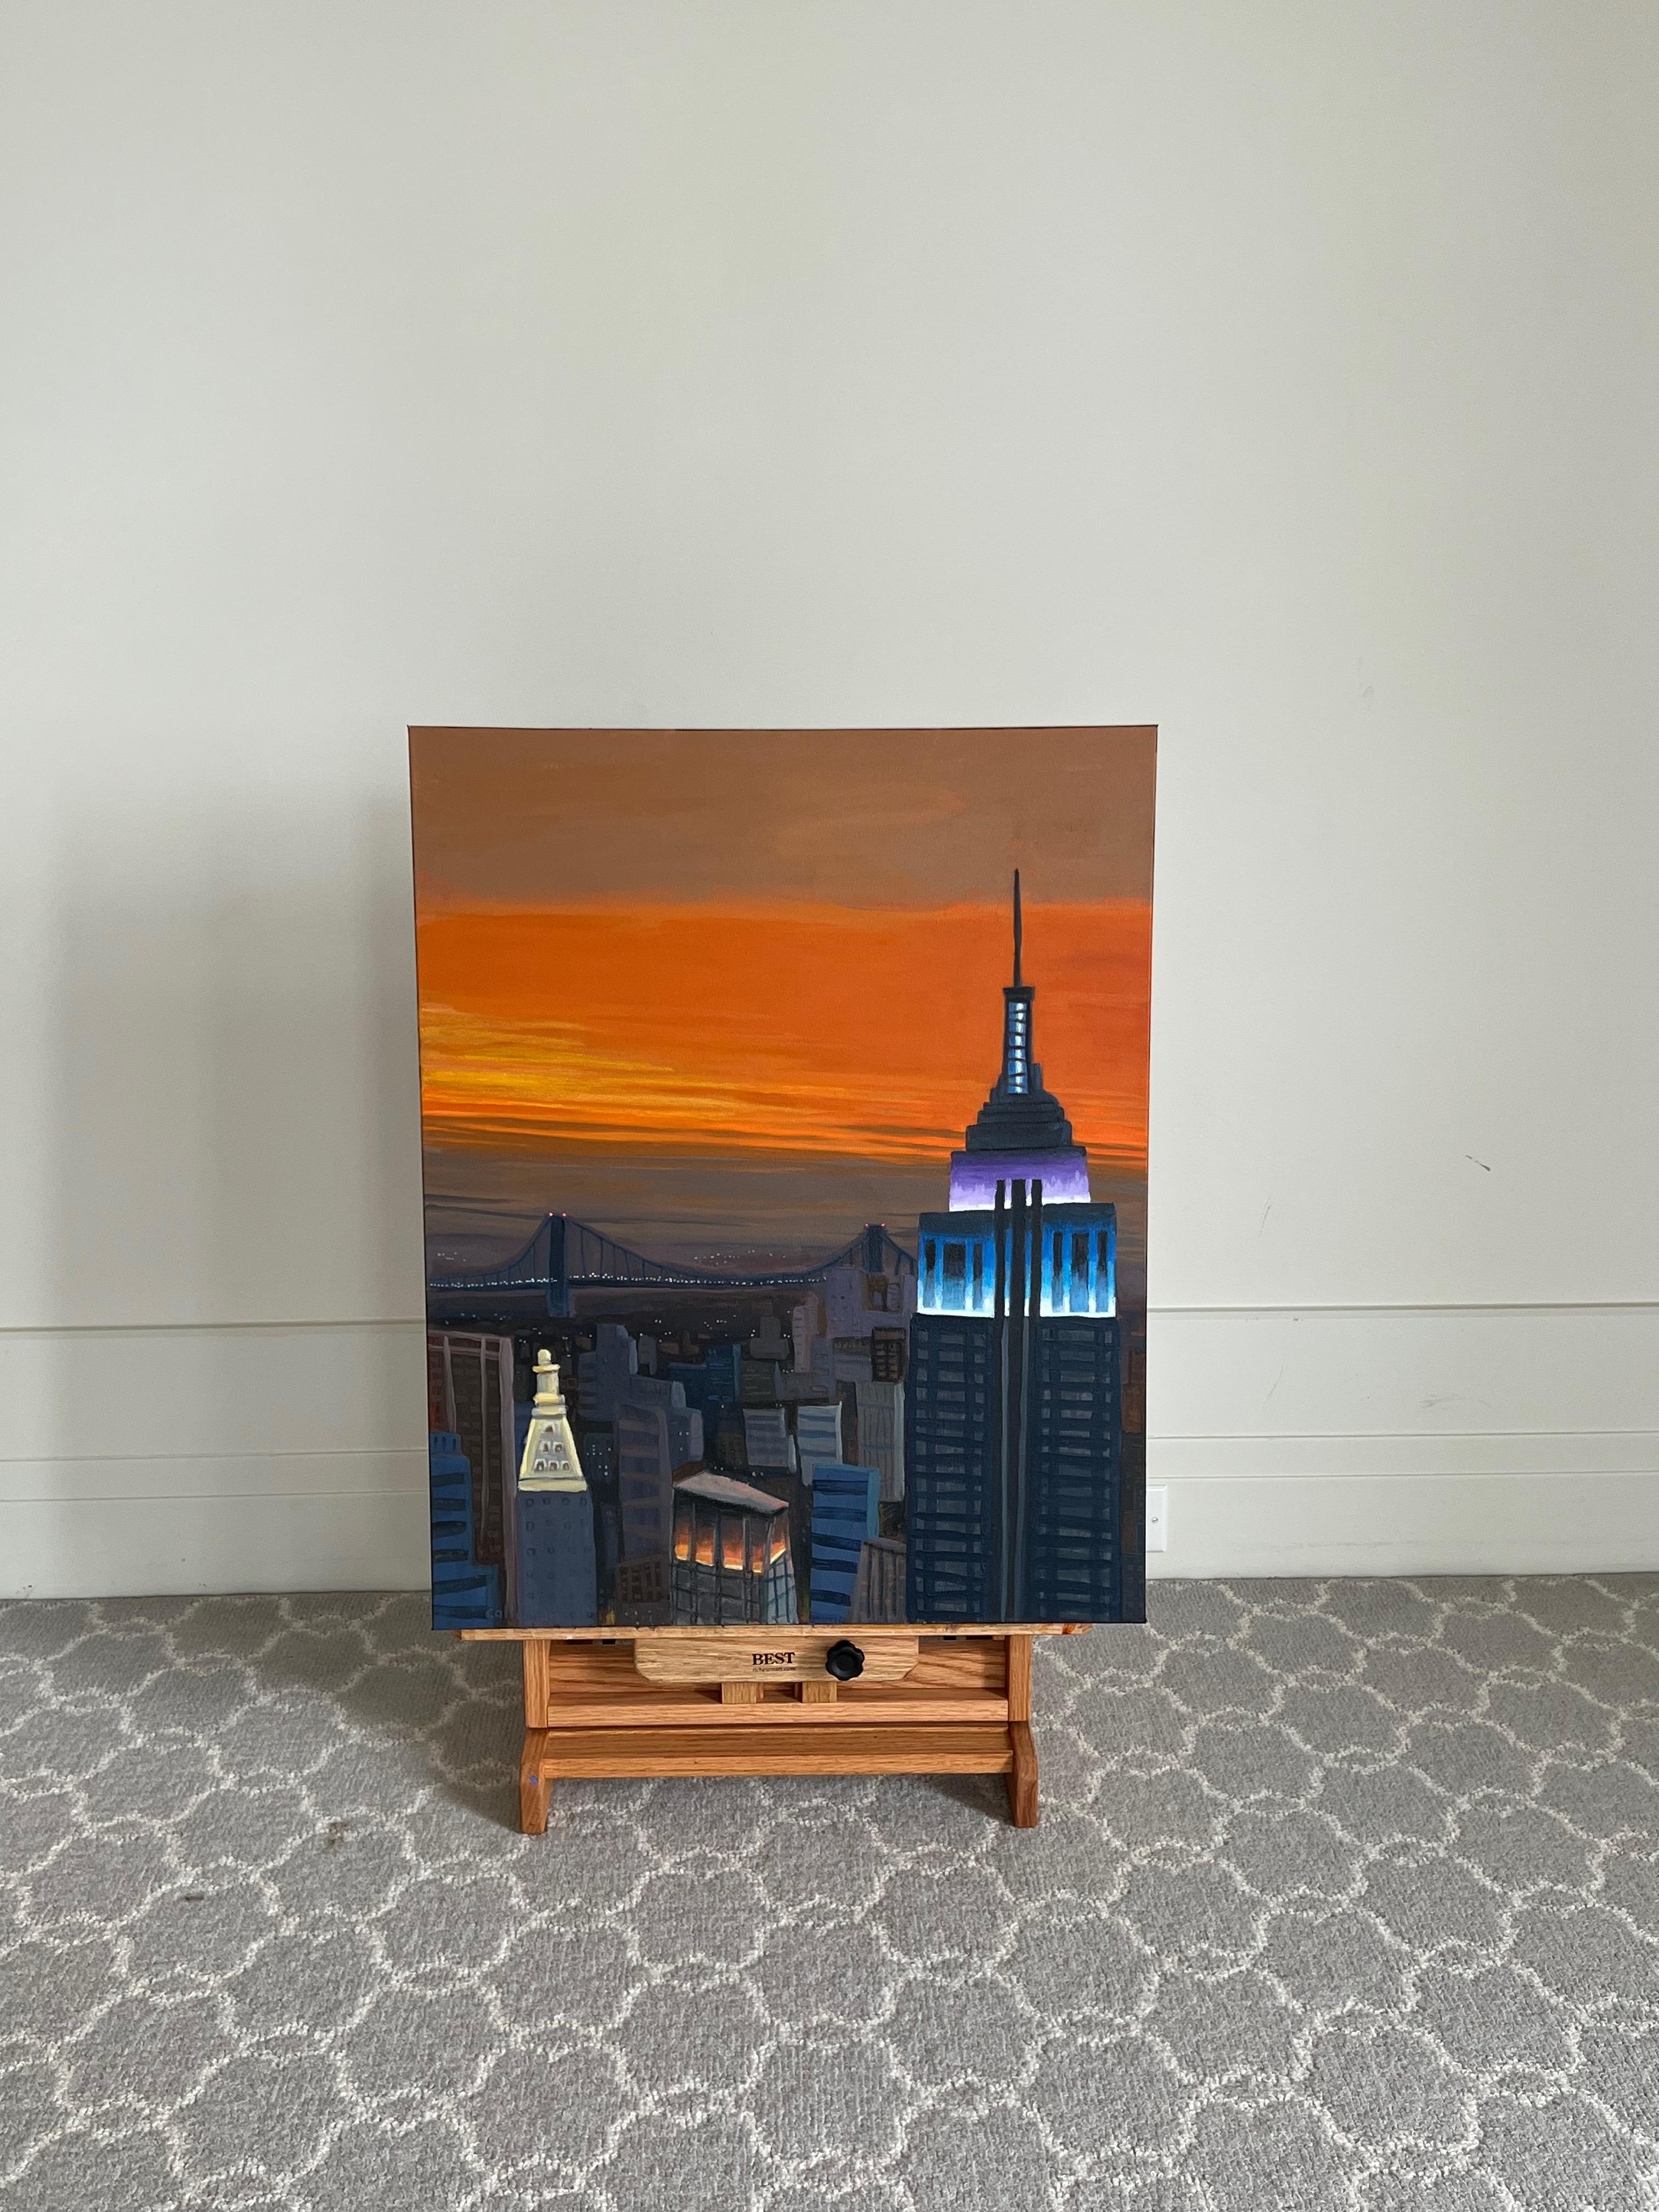 <p>Artist Comments<br>Artist Brian Callaghan depicts the Empire State Building during sunset. The vibrant orange sky contrasts with the cool blue and violet light emanating from the building. The composition captures the metropolis on the cusp of